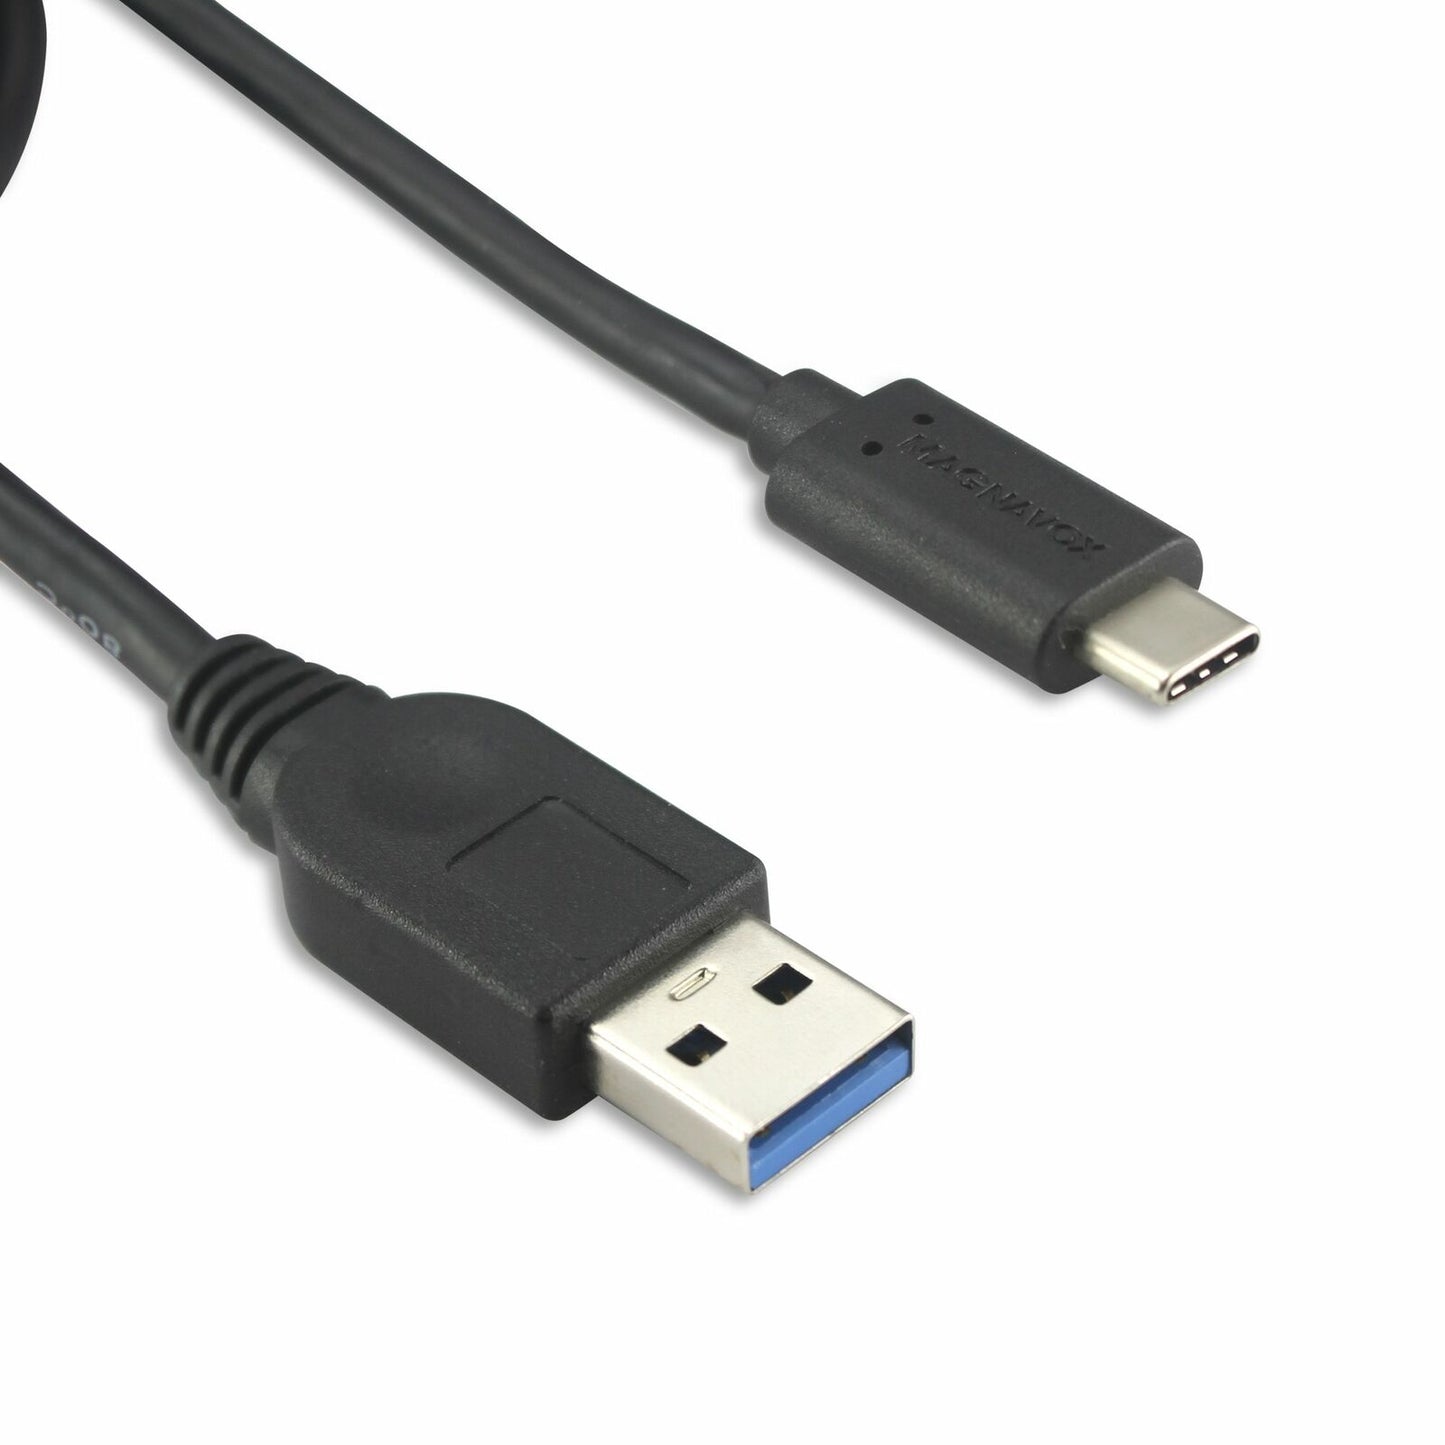 Magnavox MC4006 3' Type C to USB 3.0 Cable Charger